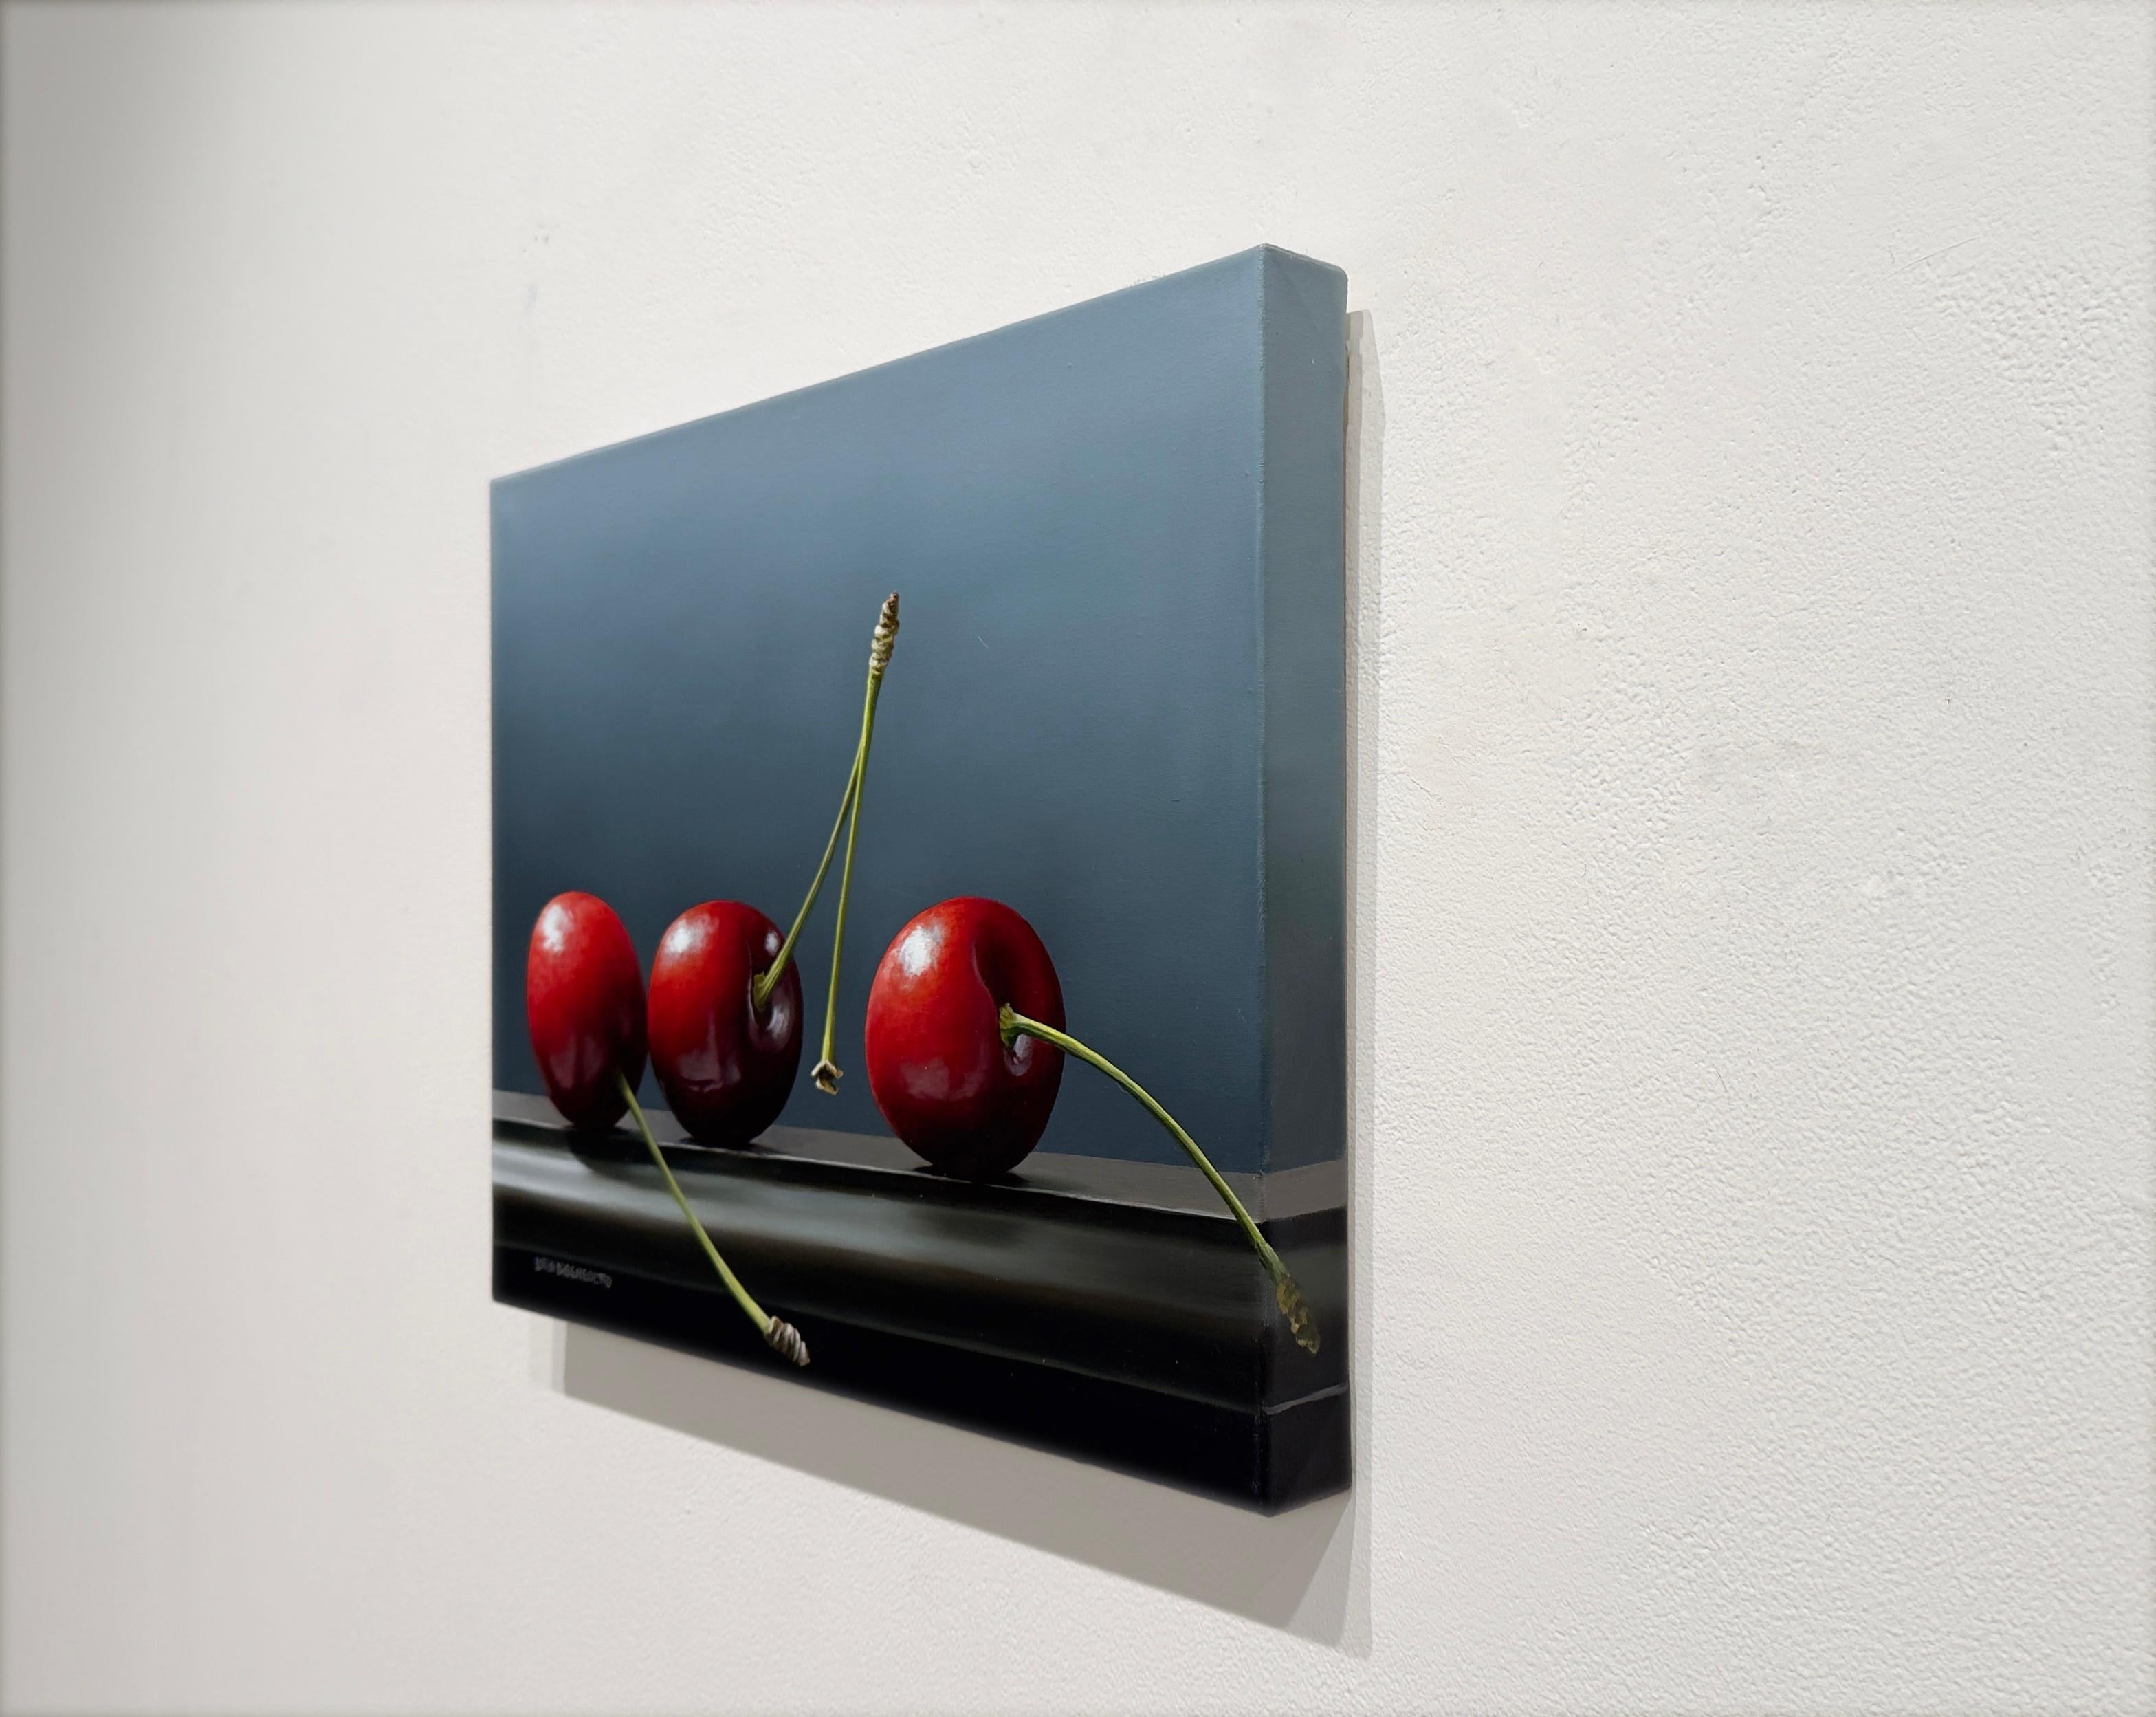 TRIO OF CHERRIES - Realism/ Still Life / Fruit - Contemporary Painting by Loren DiBenedetto